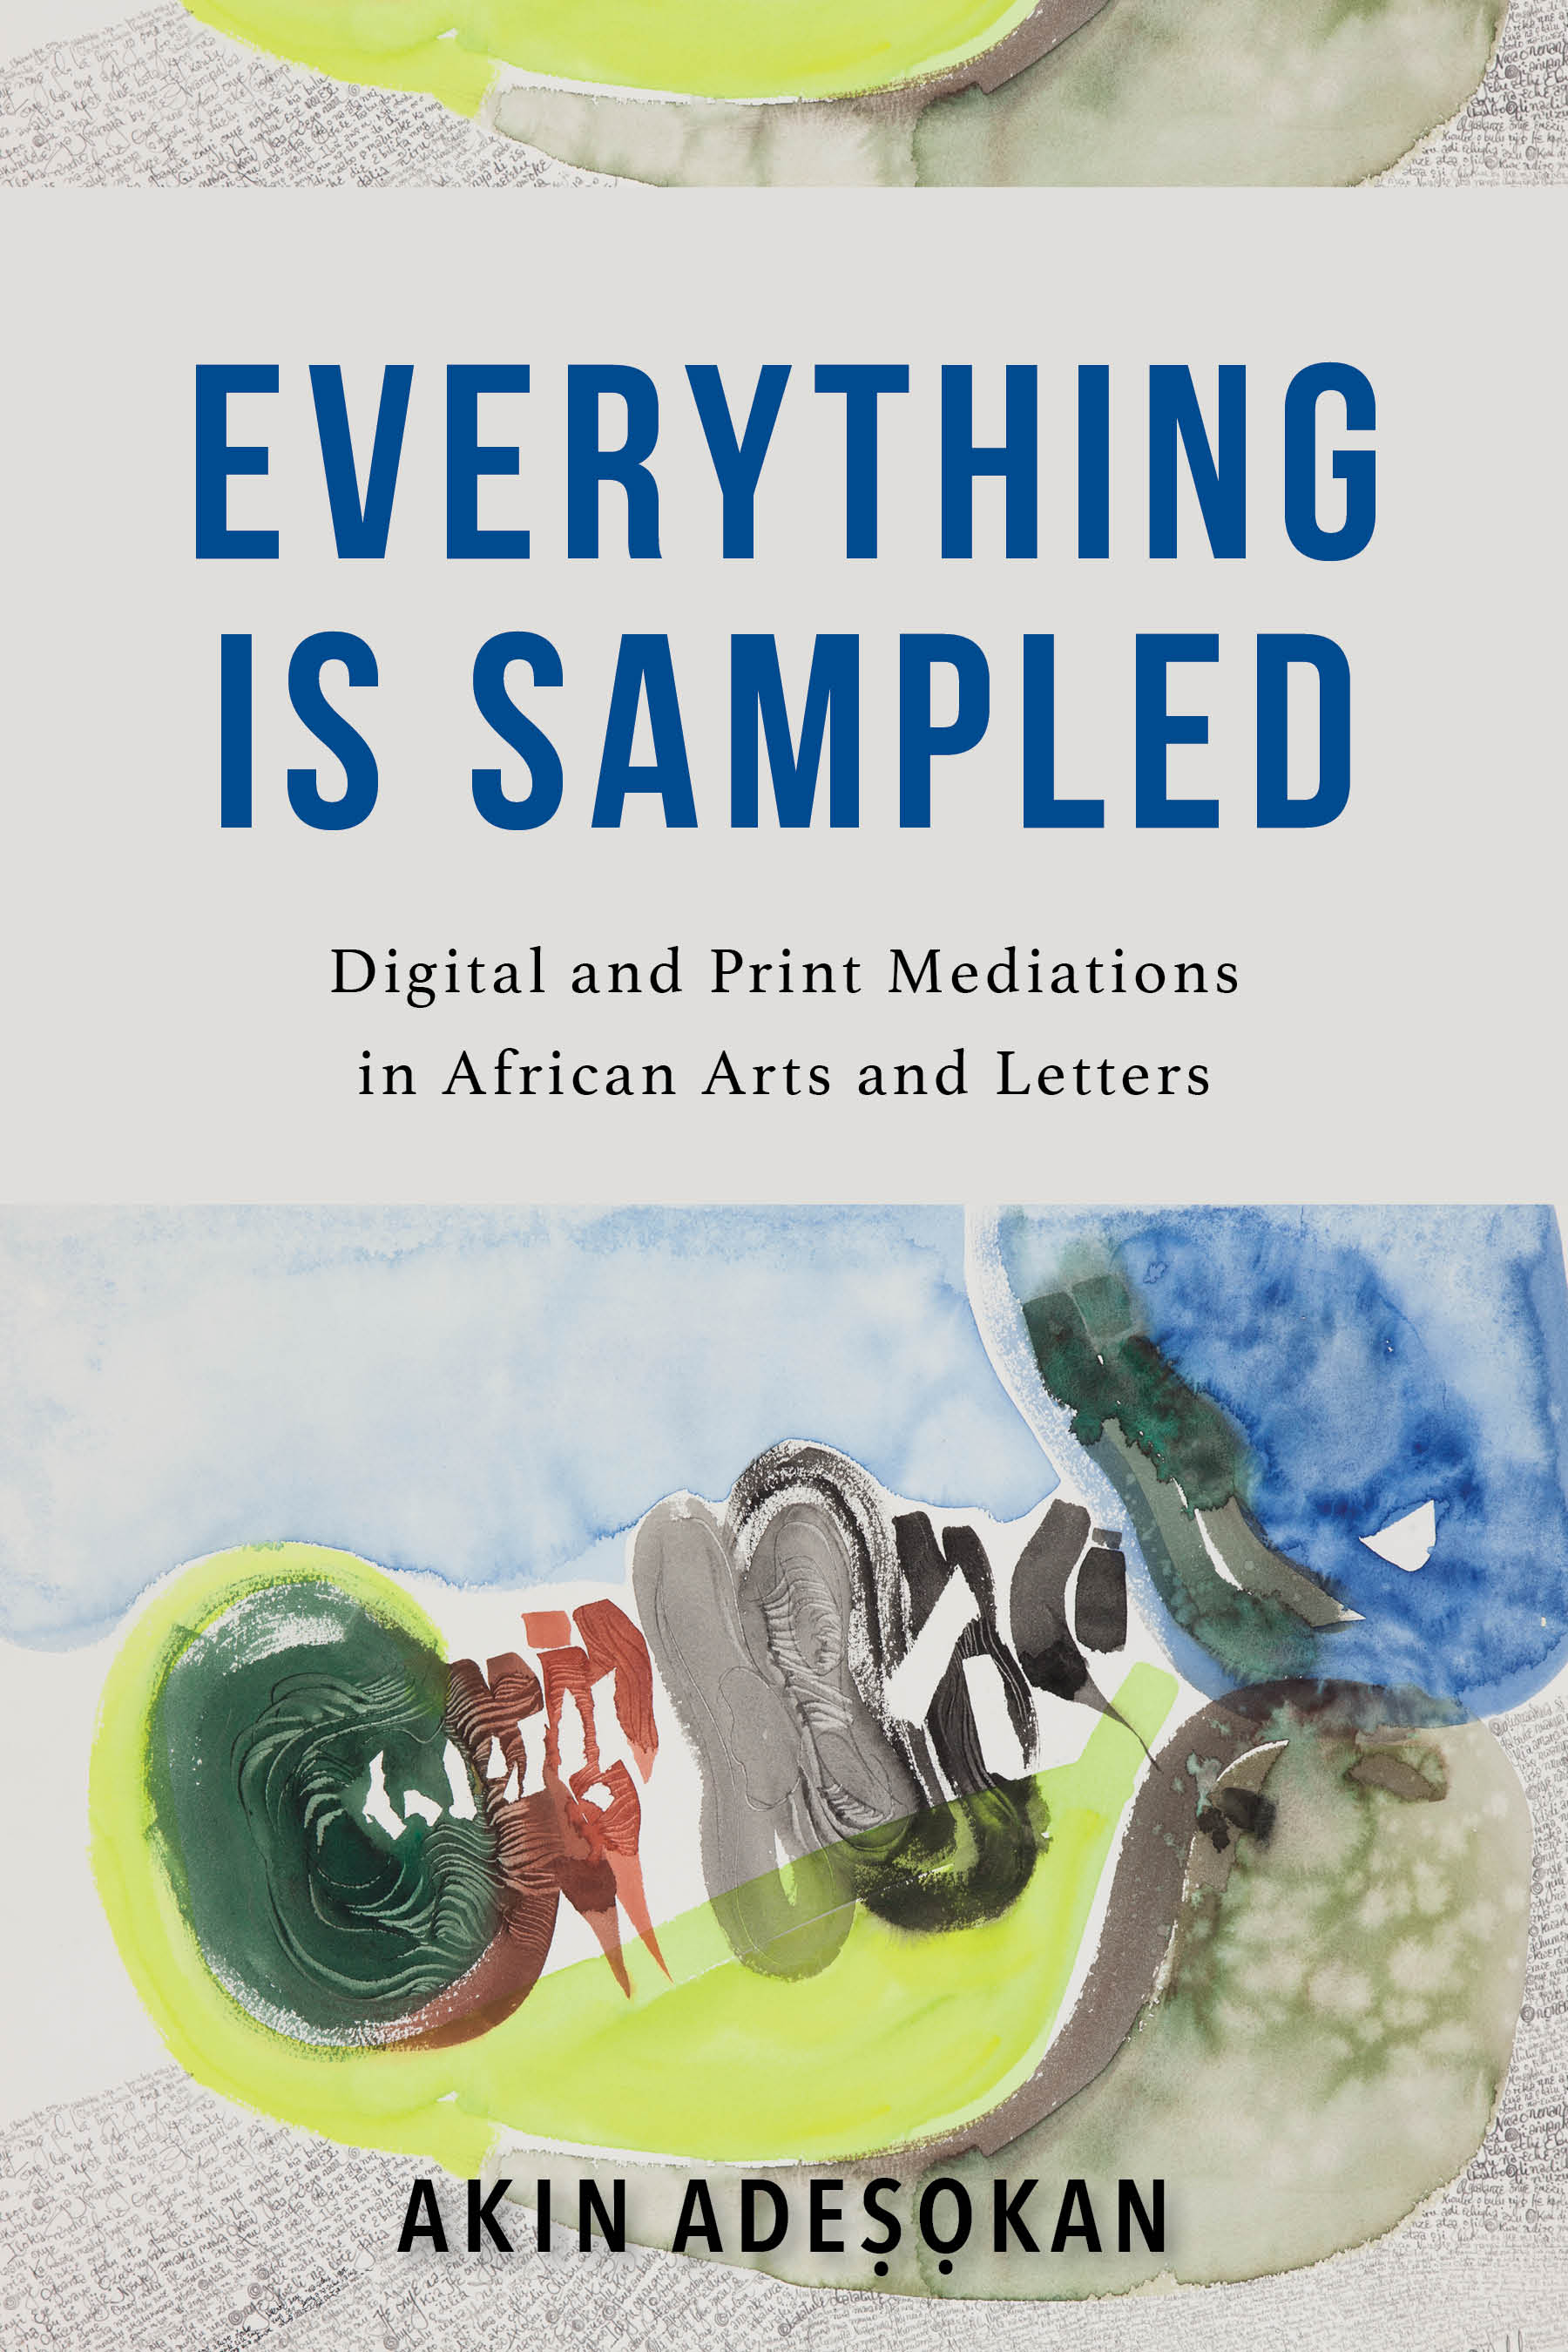 Colorful book cover for Everything is Sampled: Digital and Print Mediations in African Arts and Letters by Akin Adesokan.